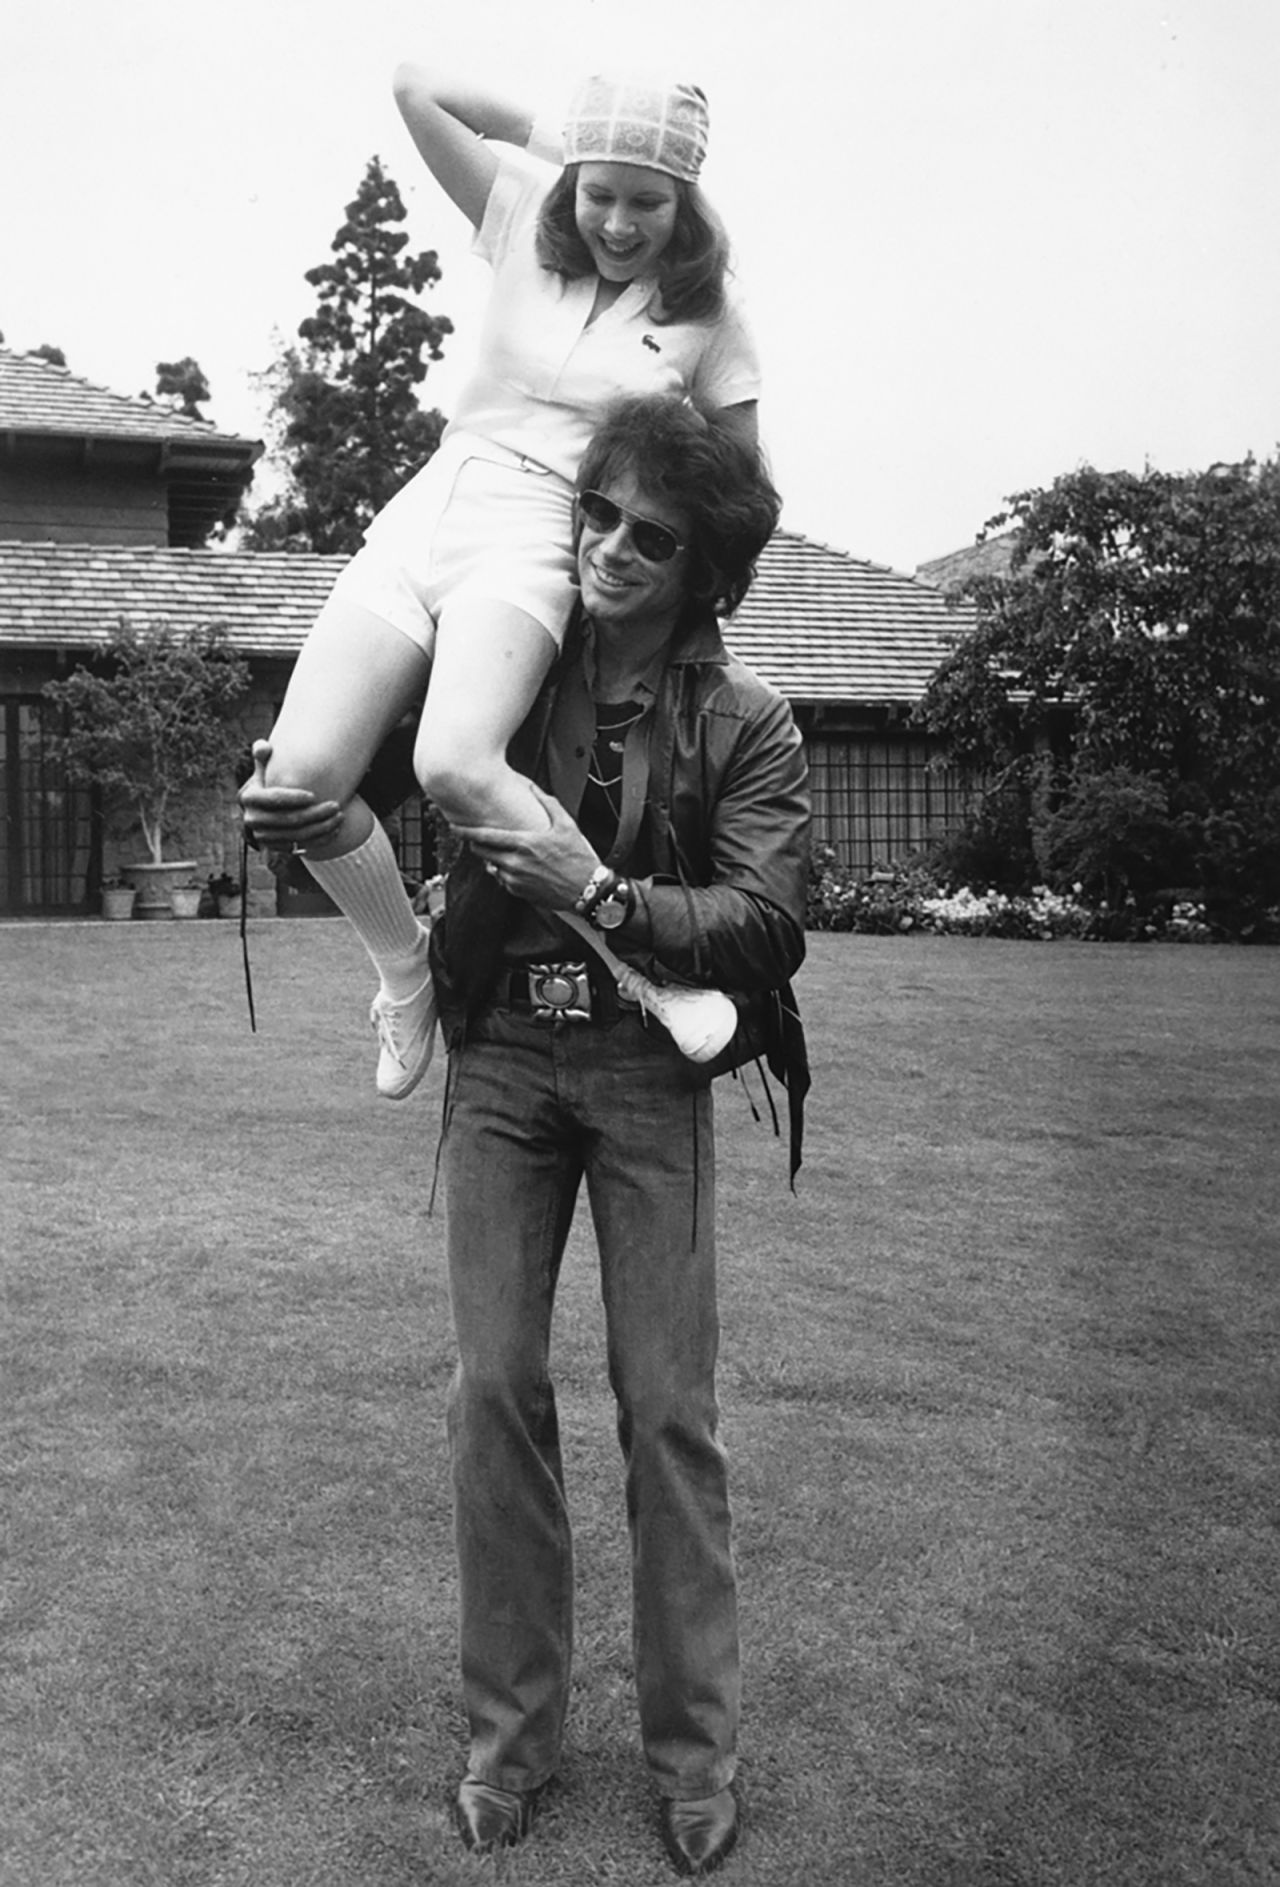 Fisher and actor Warren Beatty take a break while filming the movie "Shampoo" in 1974. It was Fisher's first movie role.